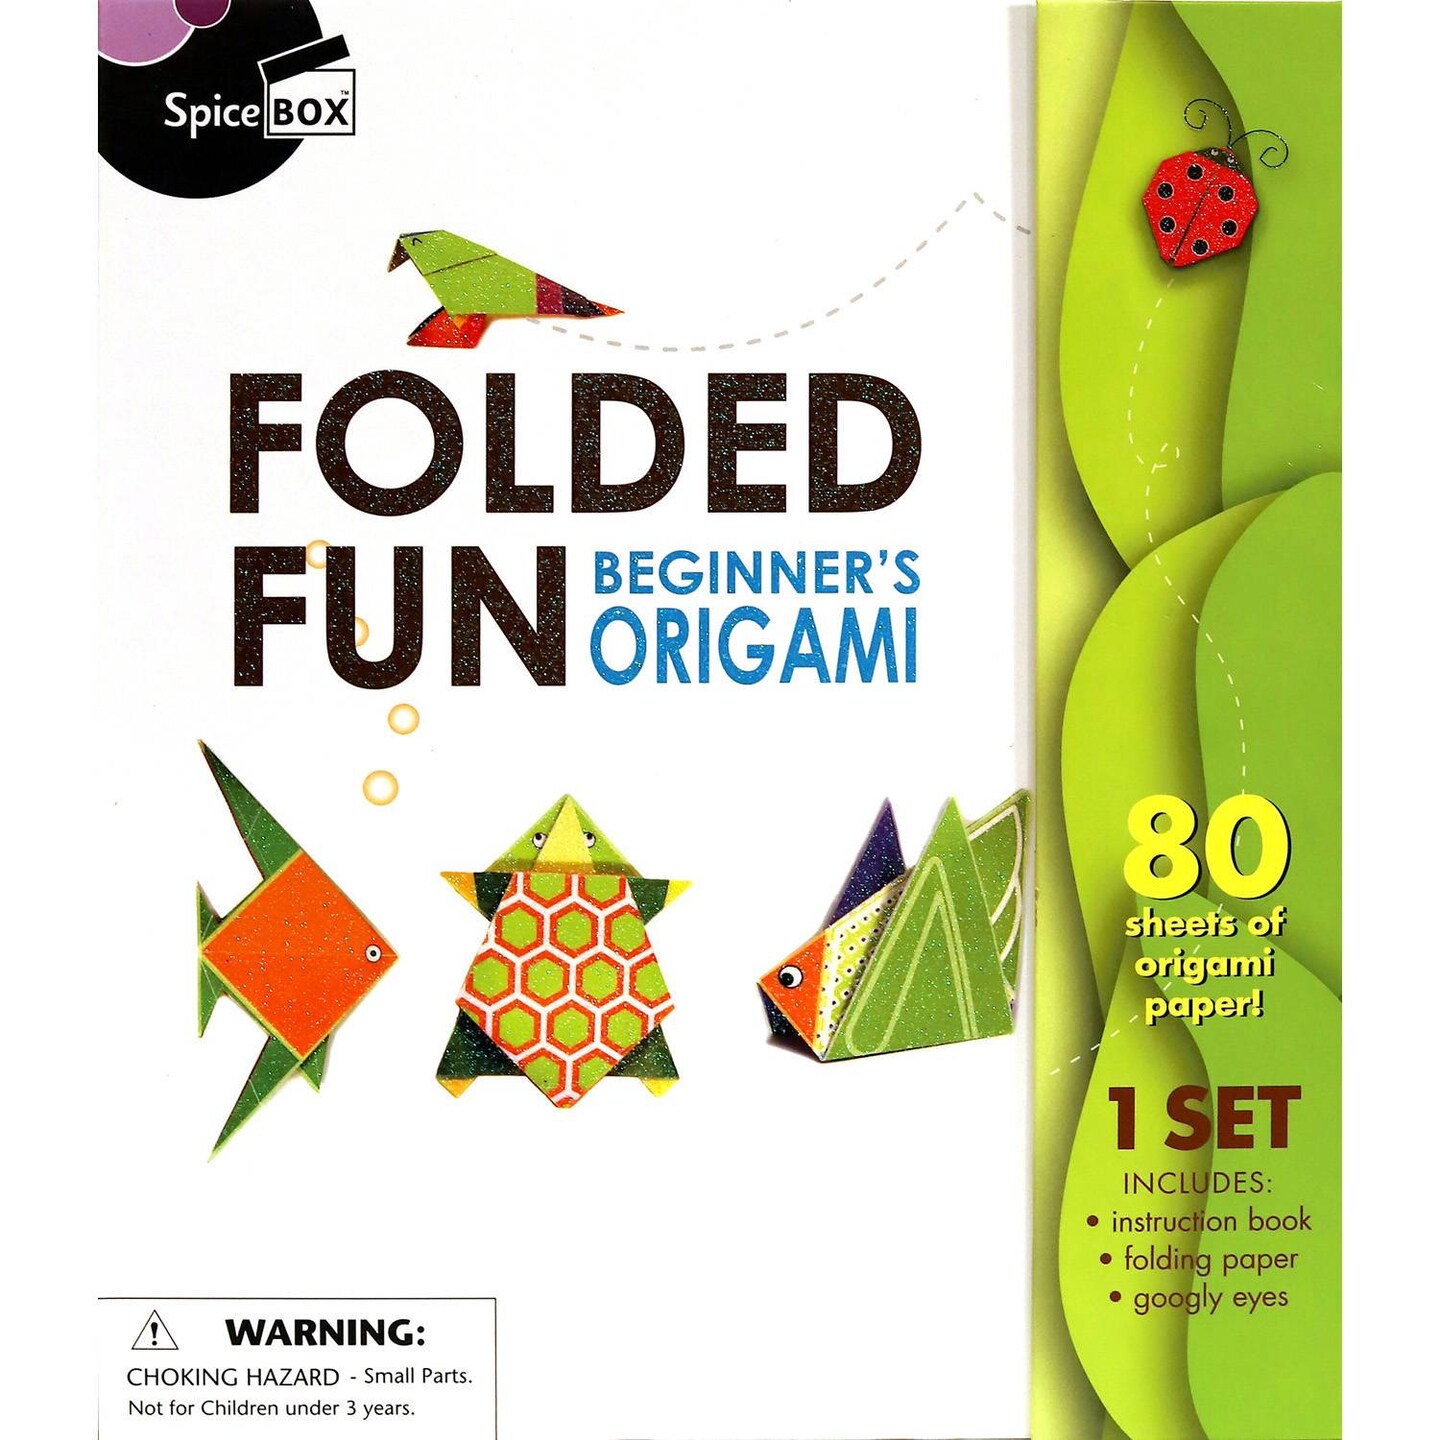 Aitoh The Ancient Art of Origami Kit